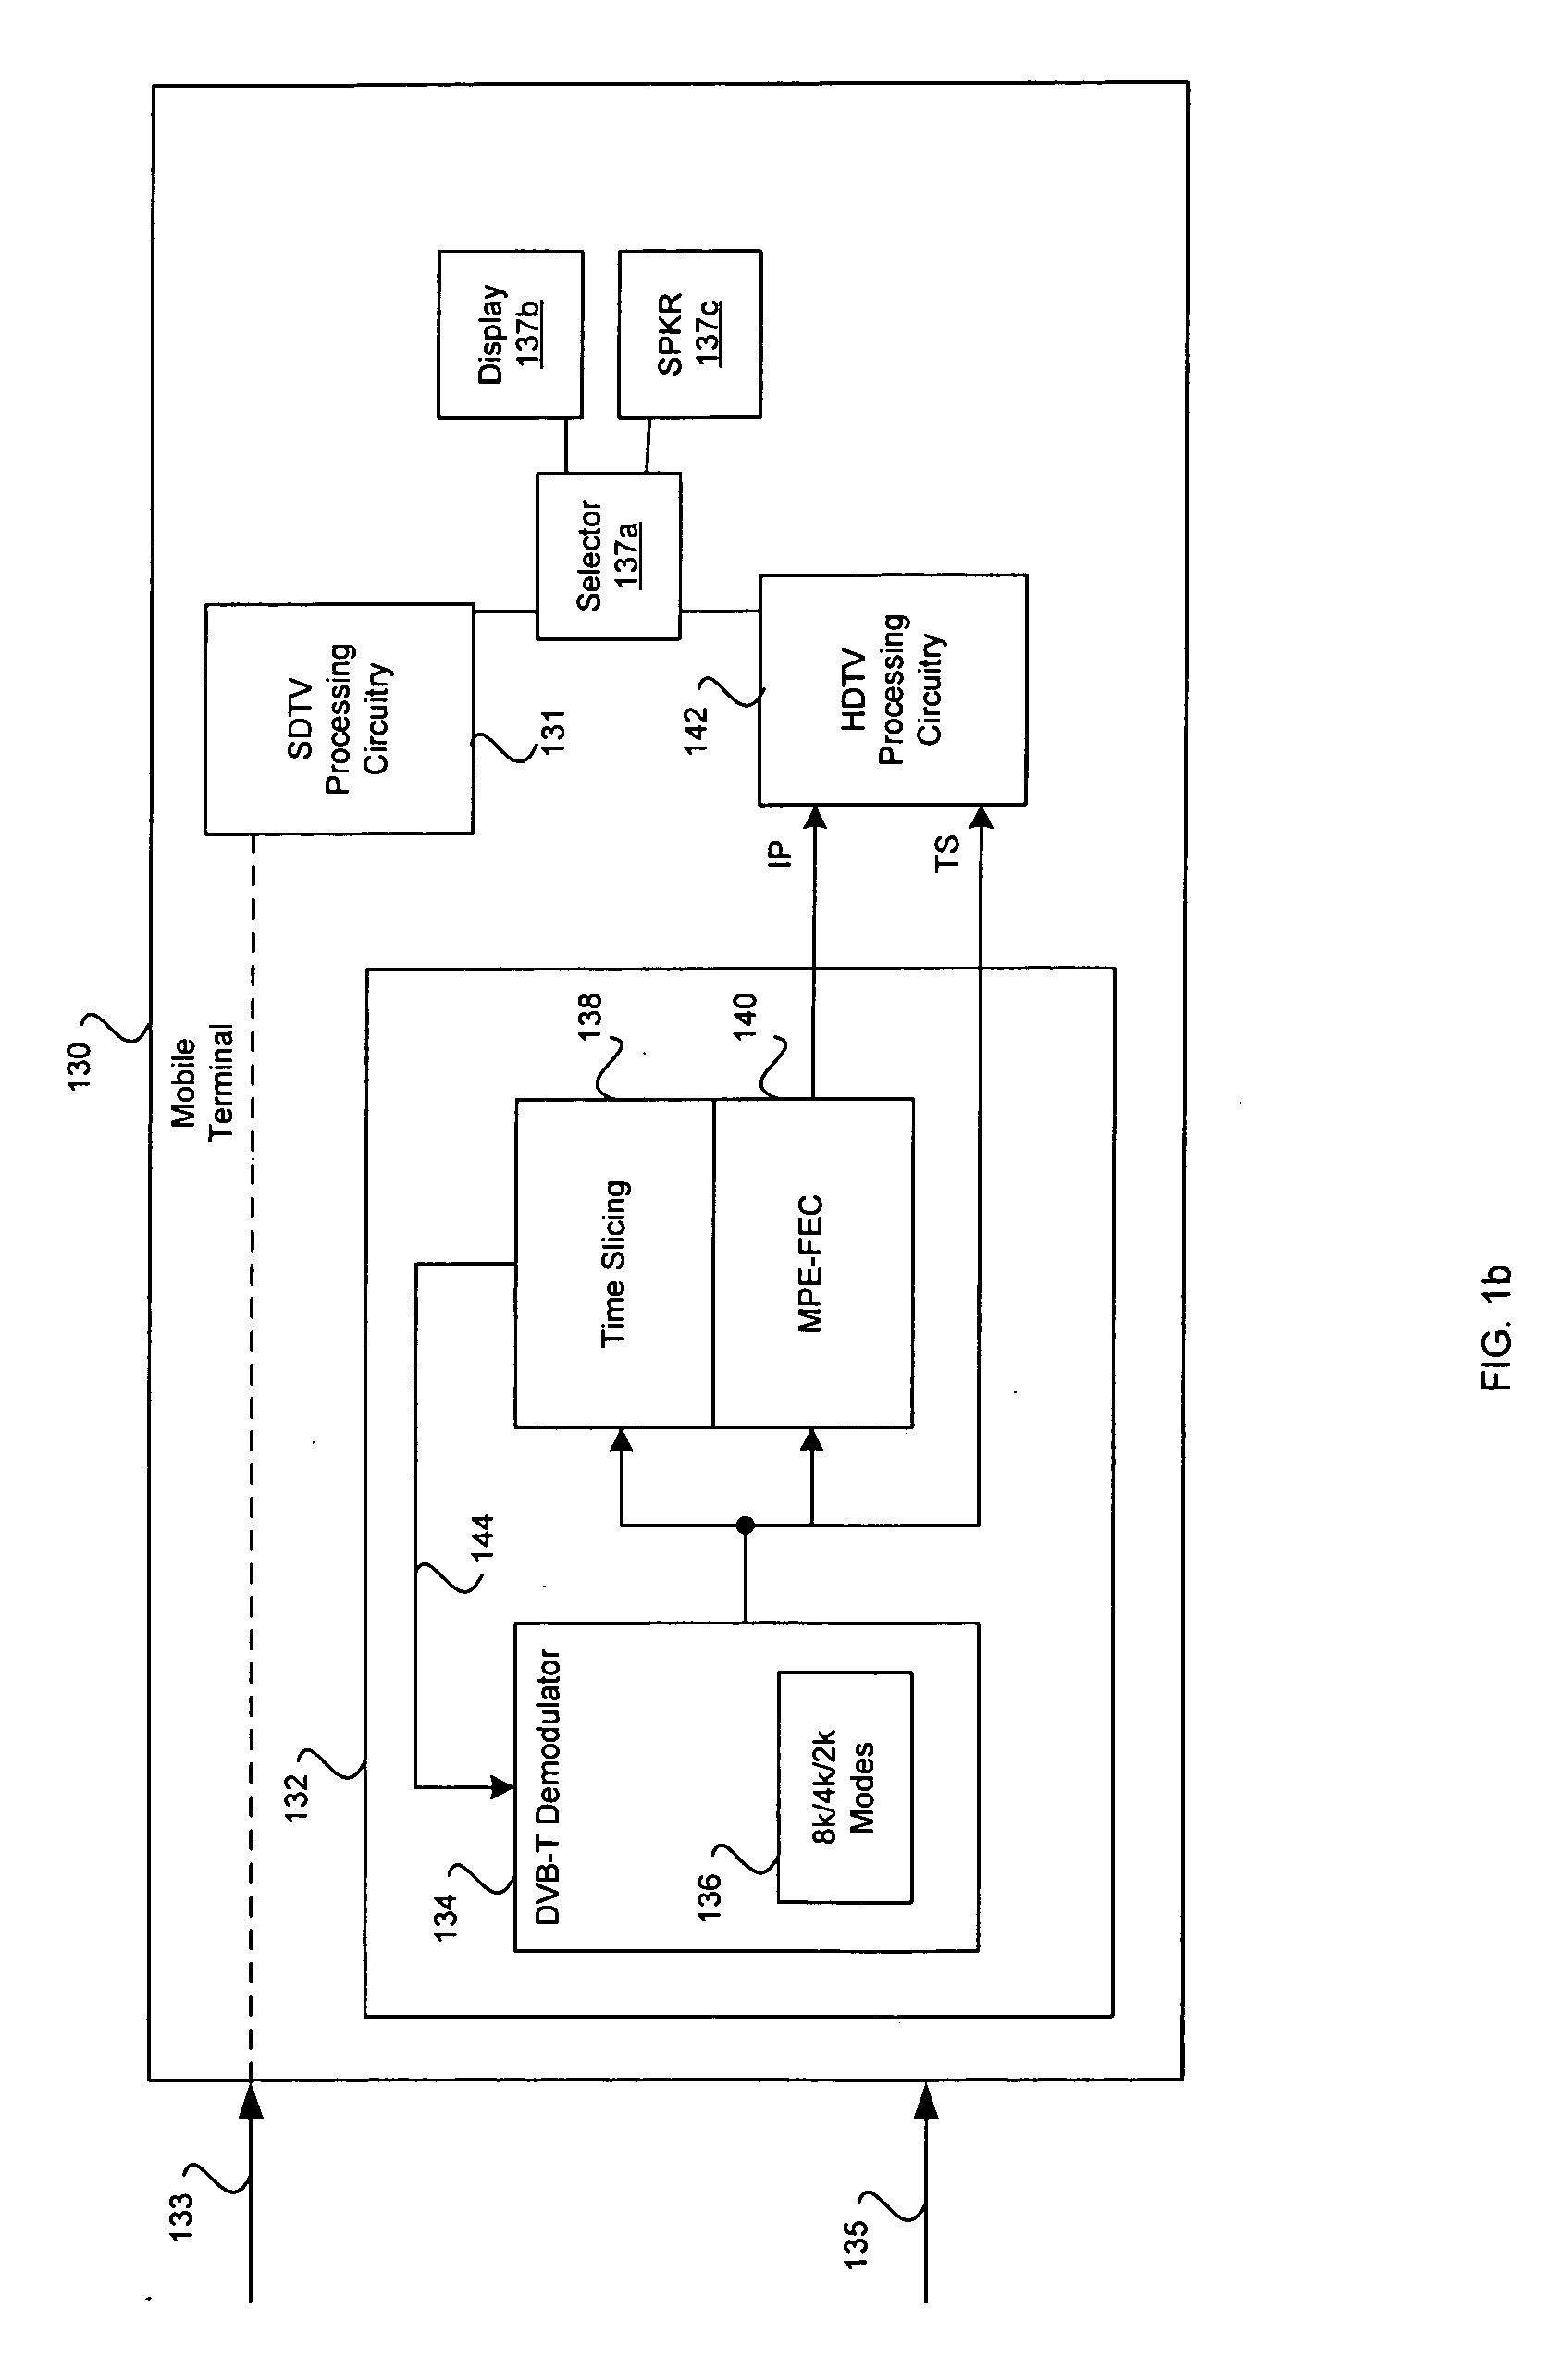 Method and system for concurrent communicating of high definition television (HDTV) and standard definition television (SDTV) information in a multistandard wireless communication system